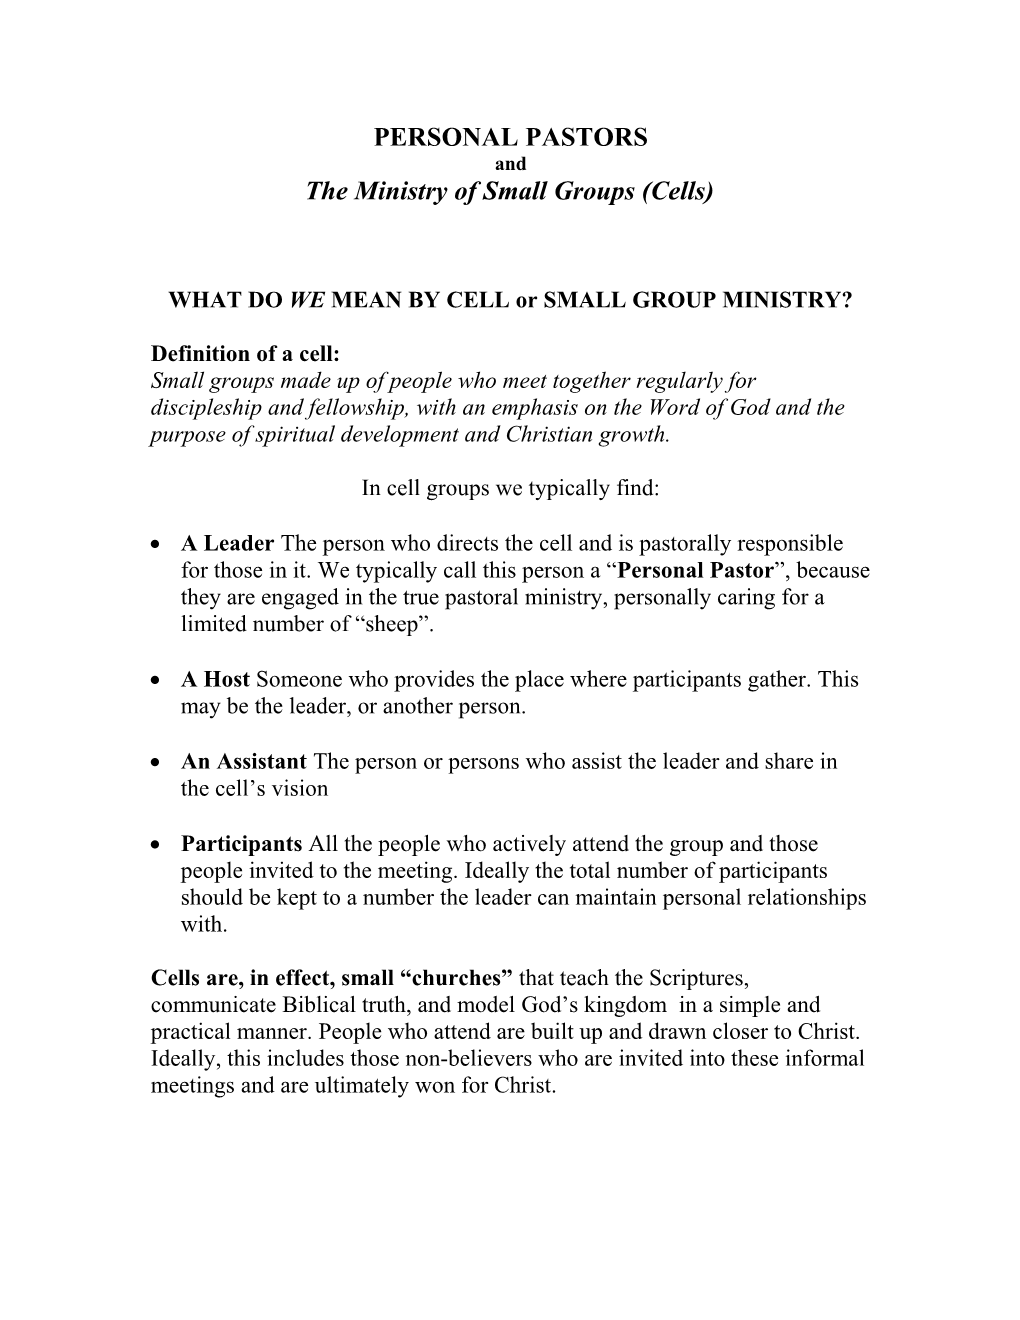 The Ministry of Small Groups (Cells)